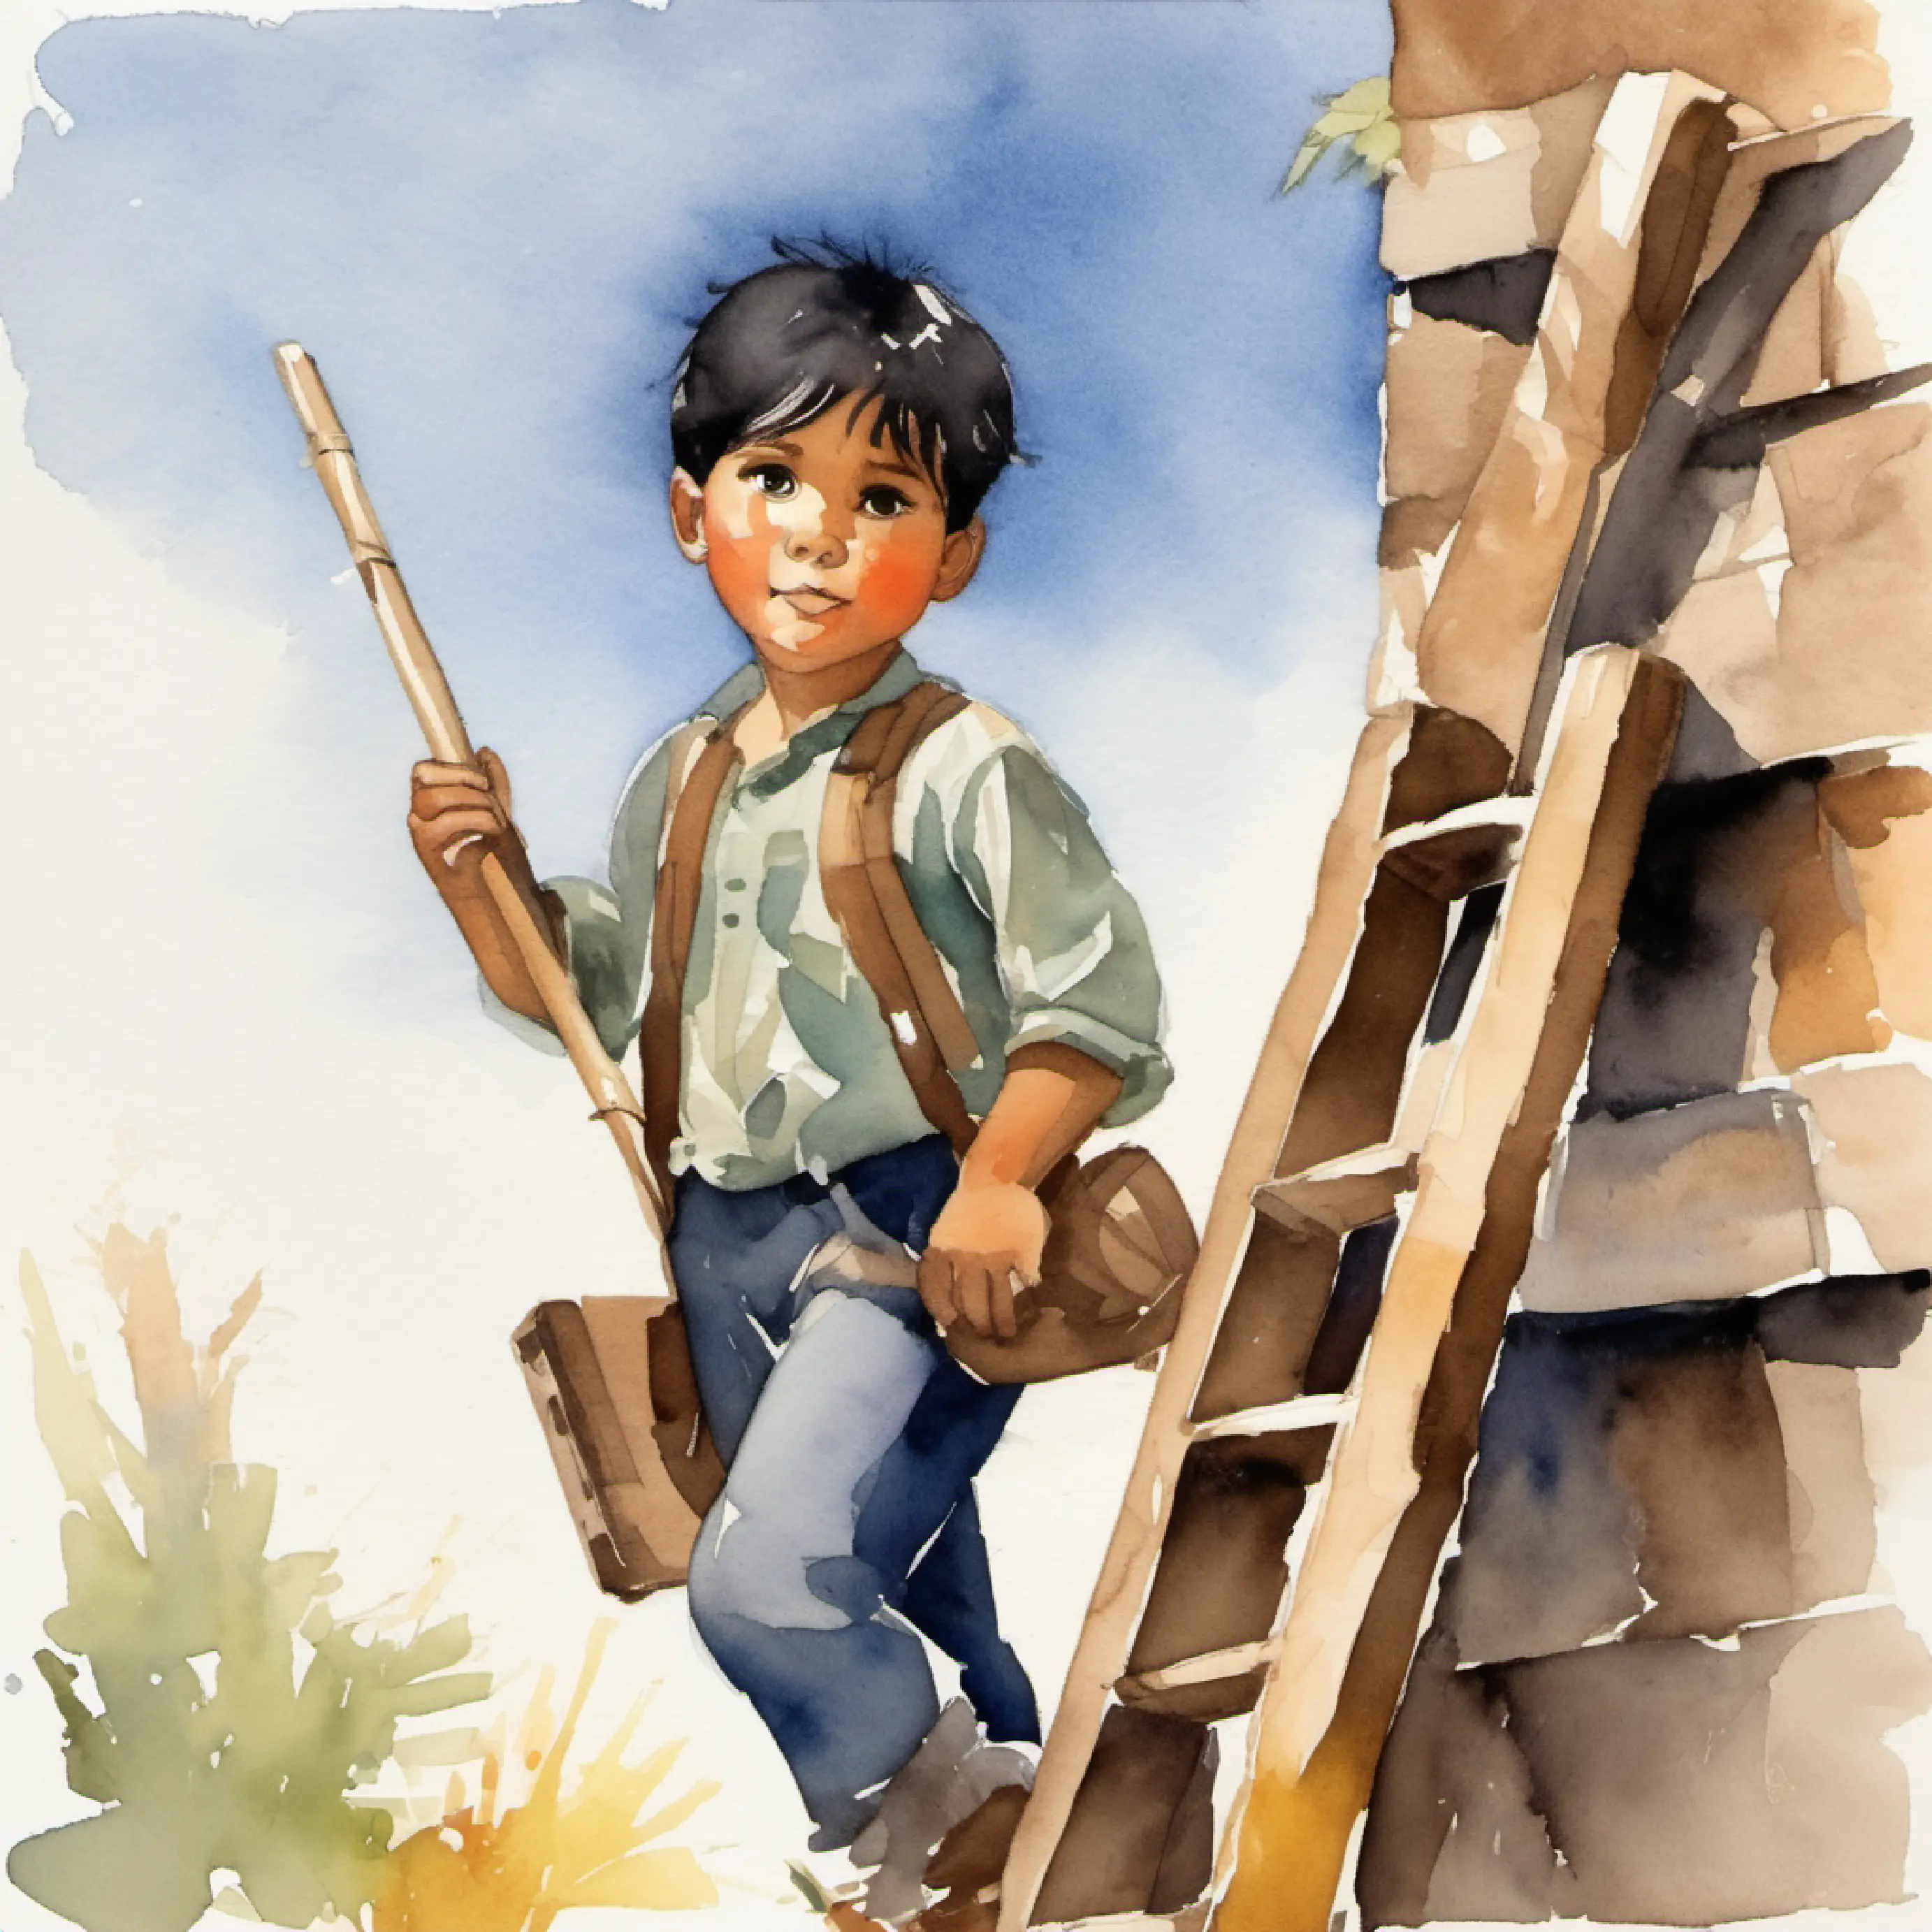 Boy with black hair, tan skin, and brown eyes suggests building a ladder to reach the nest.